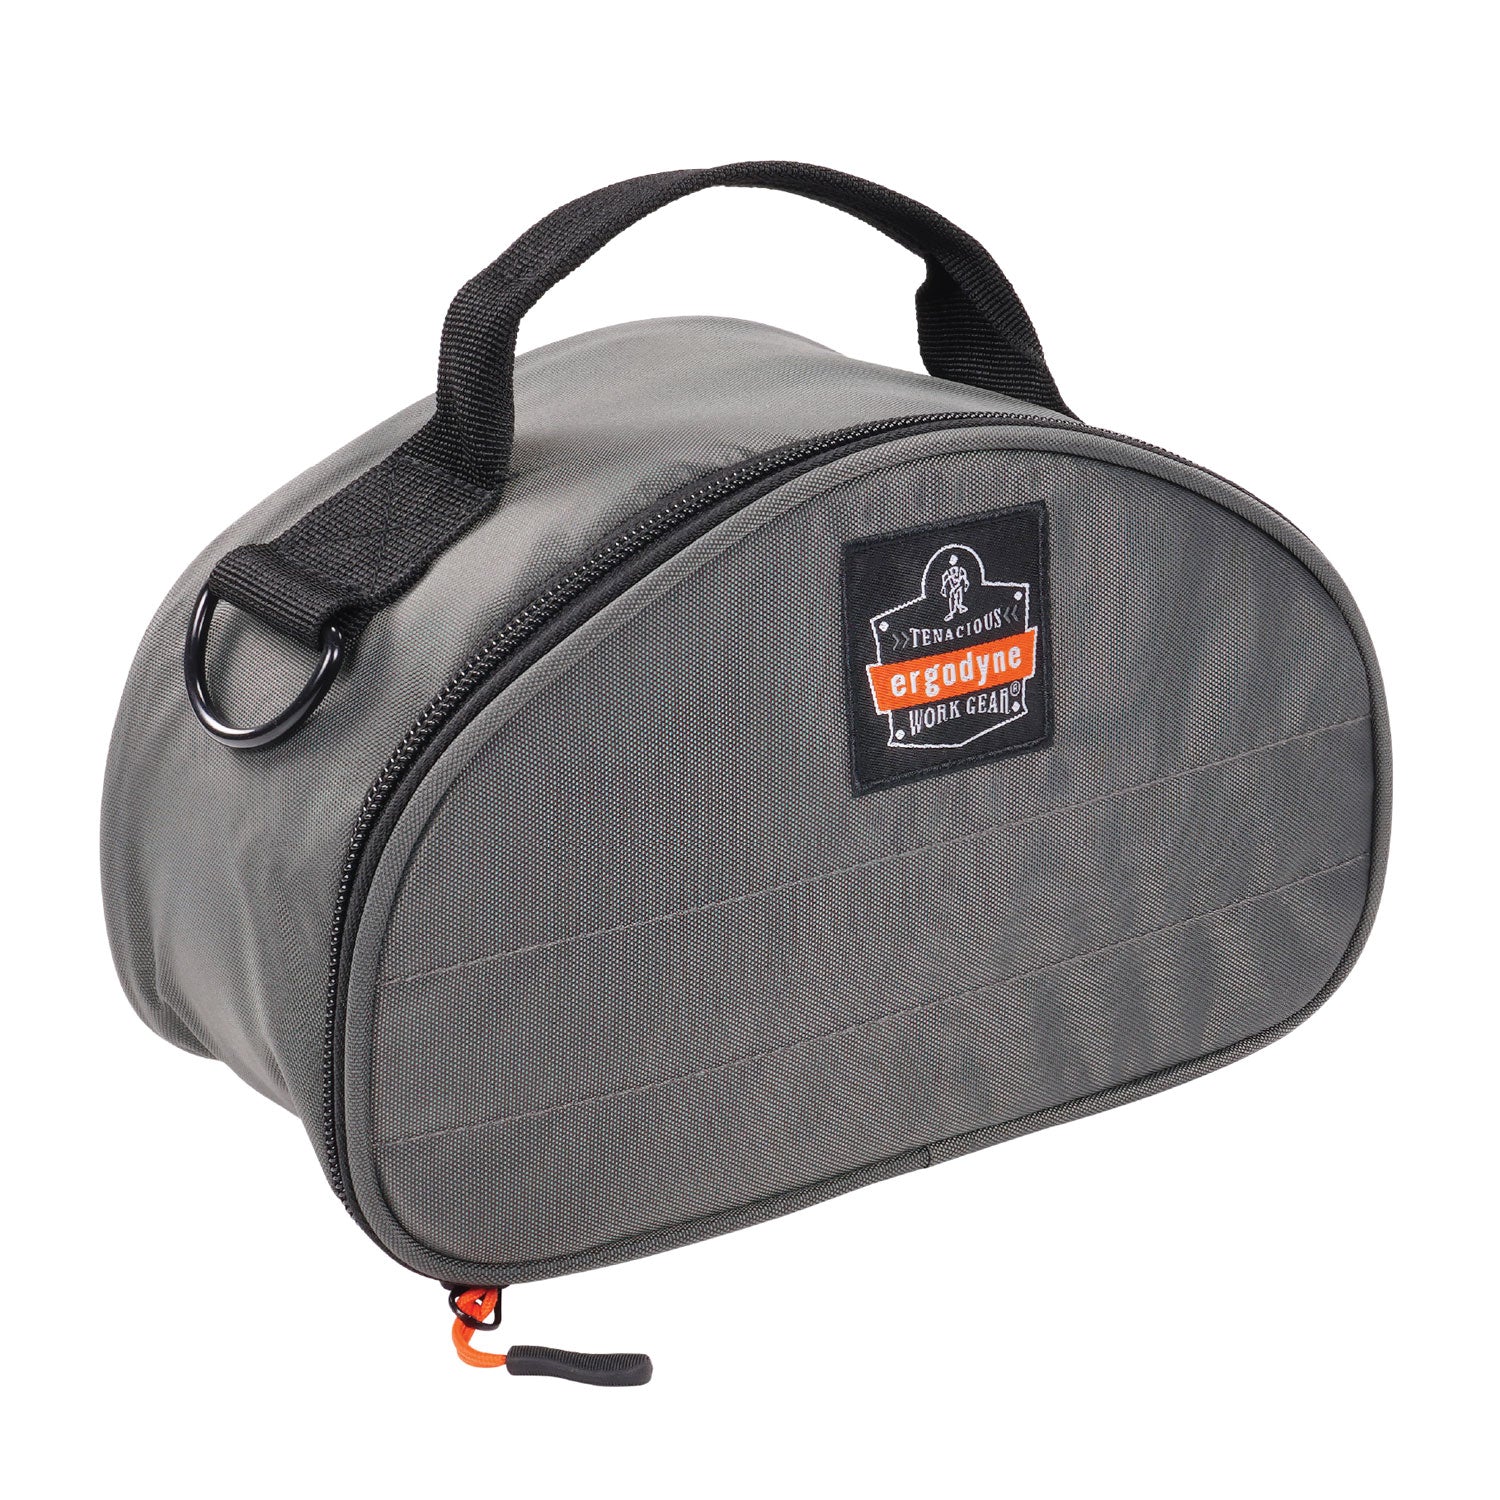 arsenal-5187-clamshell-half-respirator-bag-with-zipper-closure-4-x-9-x-5-gray-ships-in-1-3-business-days_ego13187 - 1